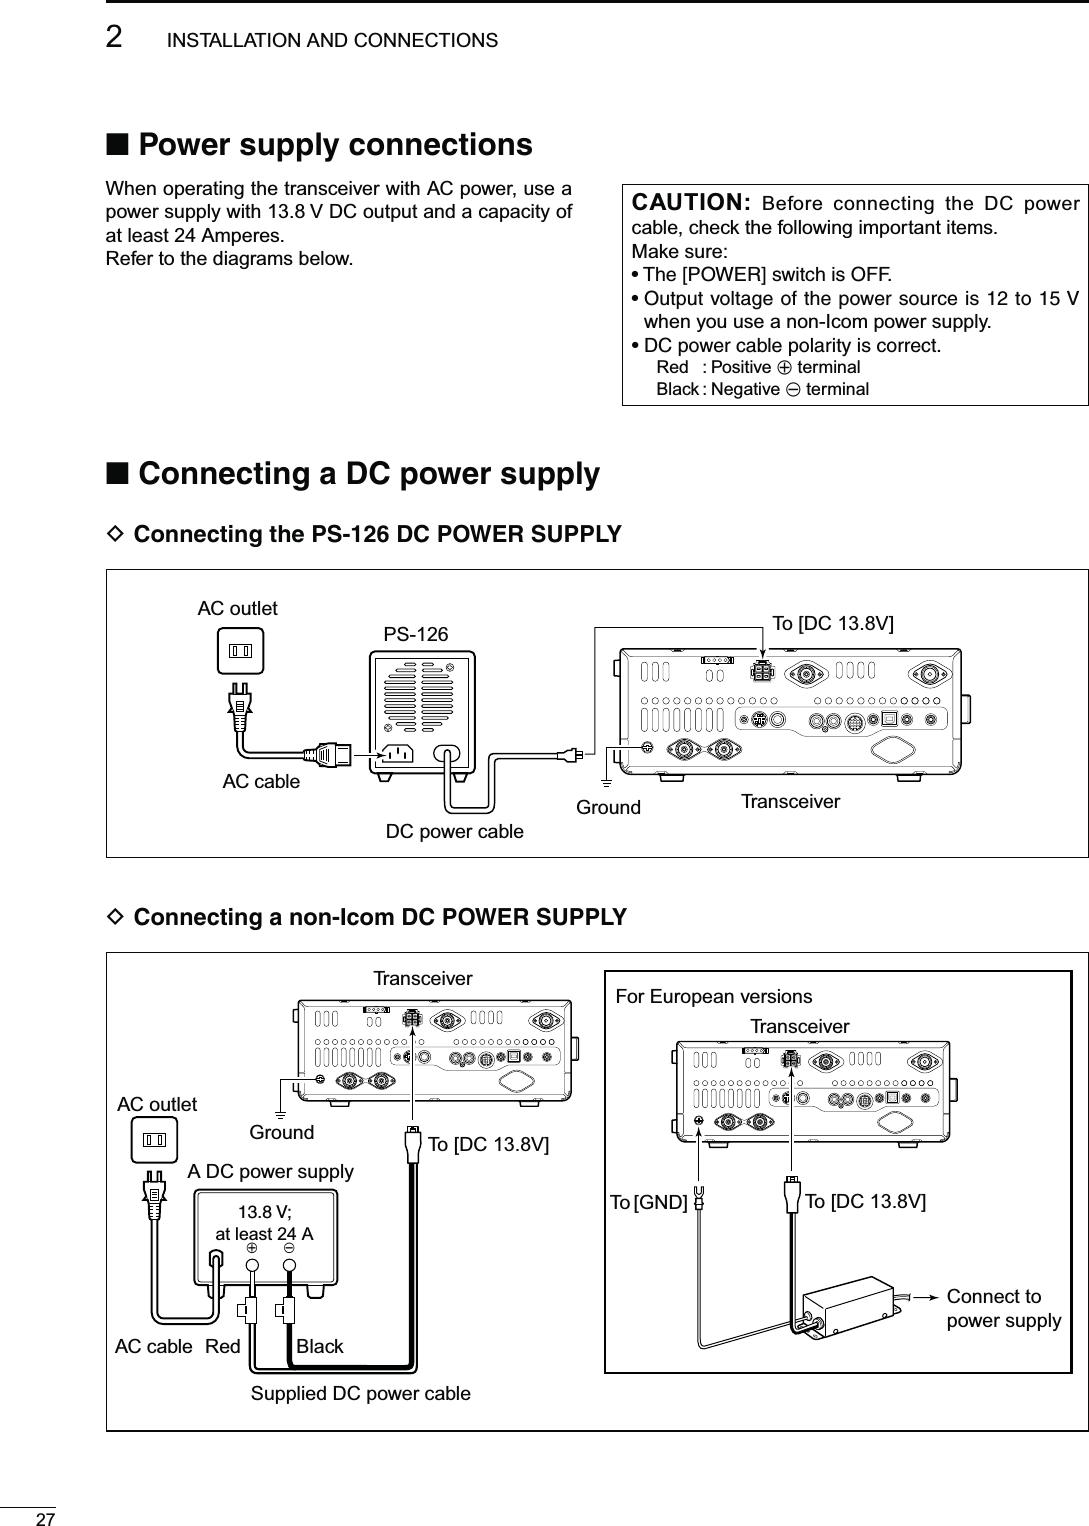 N0OWERSUPPLYCONNECTIONSWhen operating the transceiver with AC power, use a power supply with 13.8 V DC output and a capacity of at least 24 Amperes.Refer to the diagrams below.CAUTION: Before connecting the DC power cable, check the following important items.Make sure:s4HE;0/7%2=SWITCHIS/&amp;&amp;s/UTPUTVOLTAGEOFTHEPOWERSOURCEISTO6when you use a non-Icom power supply.s$#POWERCABLEPOLARITYISCORRECTRed : Positive + terminalBlack : Negative _ terminal272INSTALLATION AND CONNECTIONSTransceiverGroundPS-126AC cableAC outlet To [DC 13.8V]+_DC power cableD#ONNECTINGTHE03$#0/7%23500,9D#ONNECTINGANON)COM$#0/7%23500,9N#ONNECTINGA$#POWERSUPPLYSupplied DC power cableAC cableAC outletTransceiverTo [GND]A DC power supply6at least 24 ARed BlackTo [DC 13.8V]To [DC 13.8V]For European versionsTransceiverGroundConnect topower supply